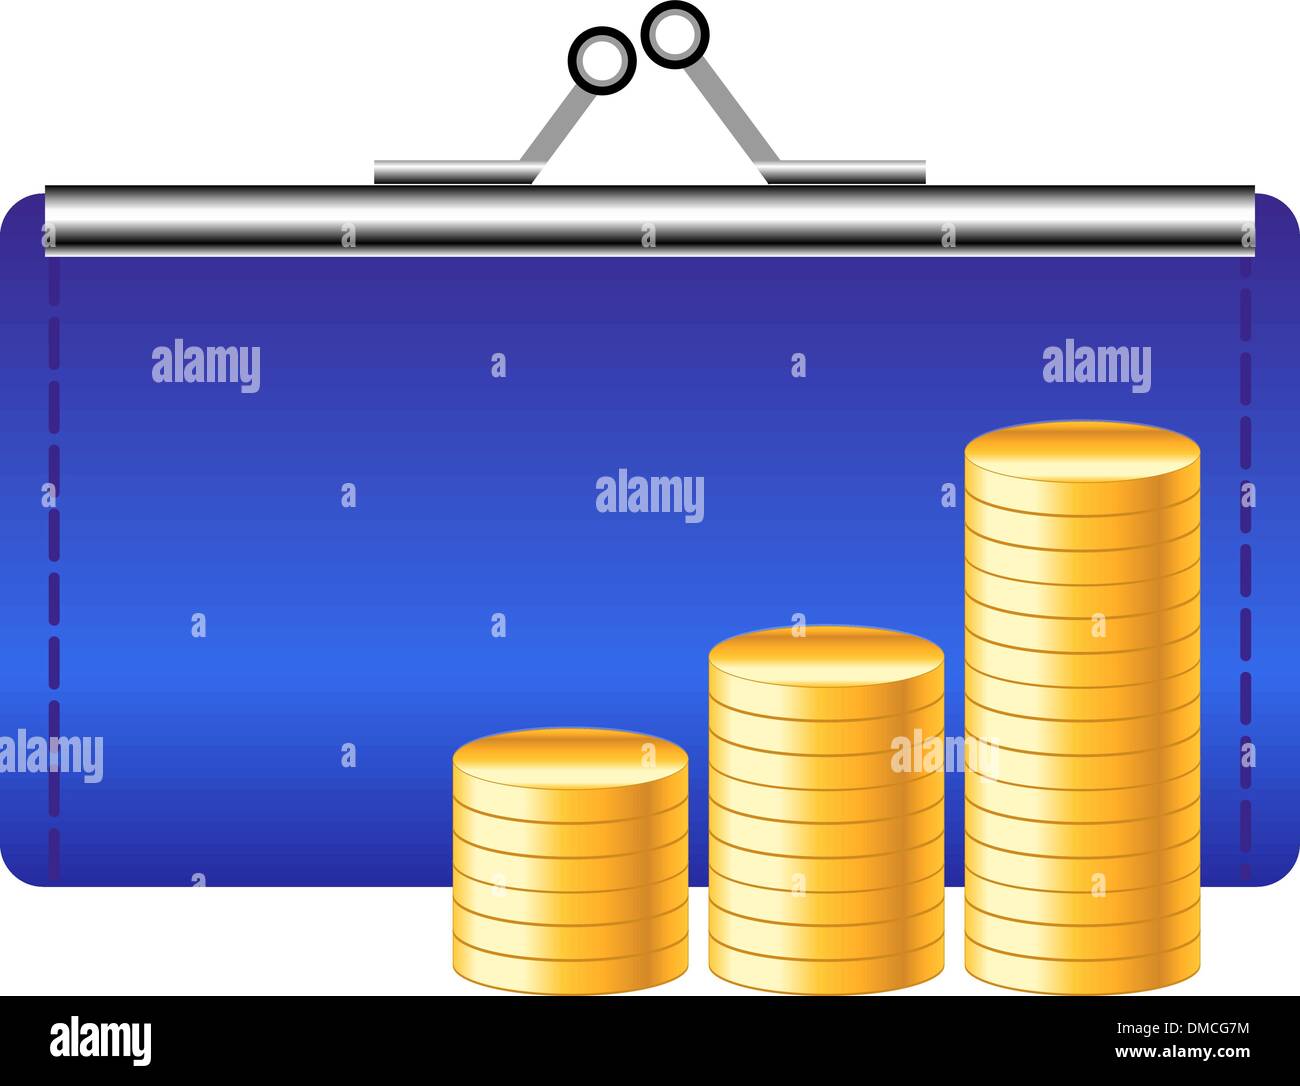 money icon with purse and coins Stock Vector